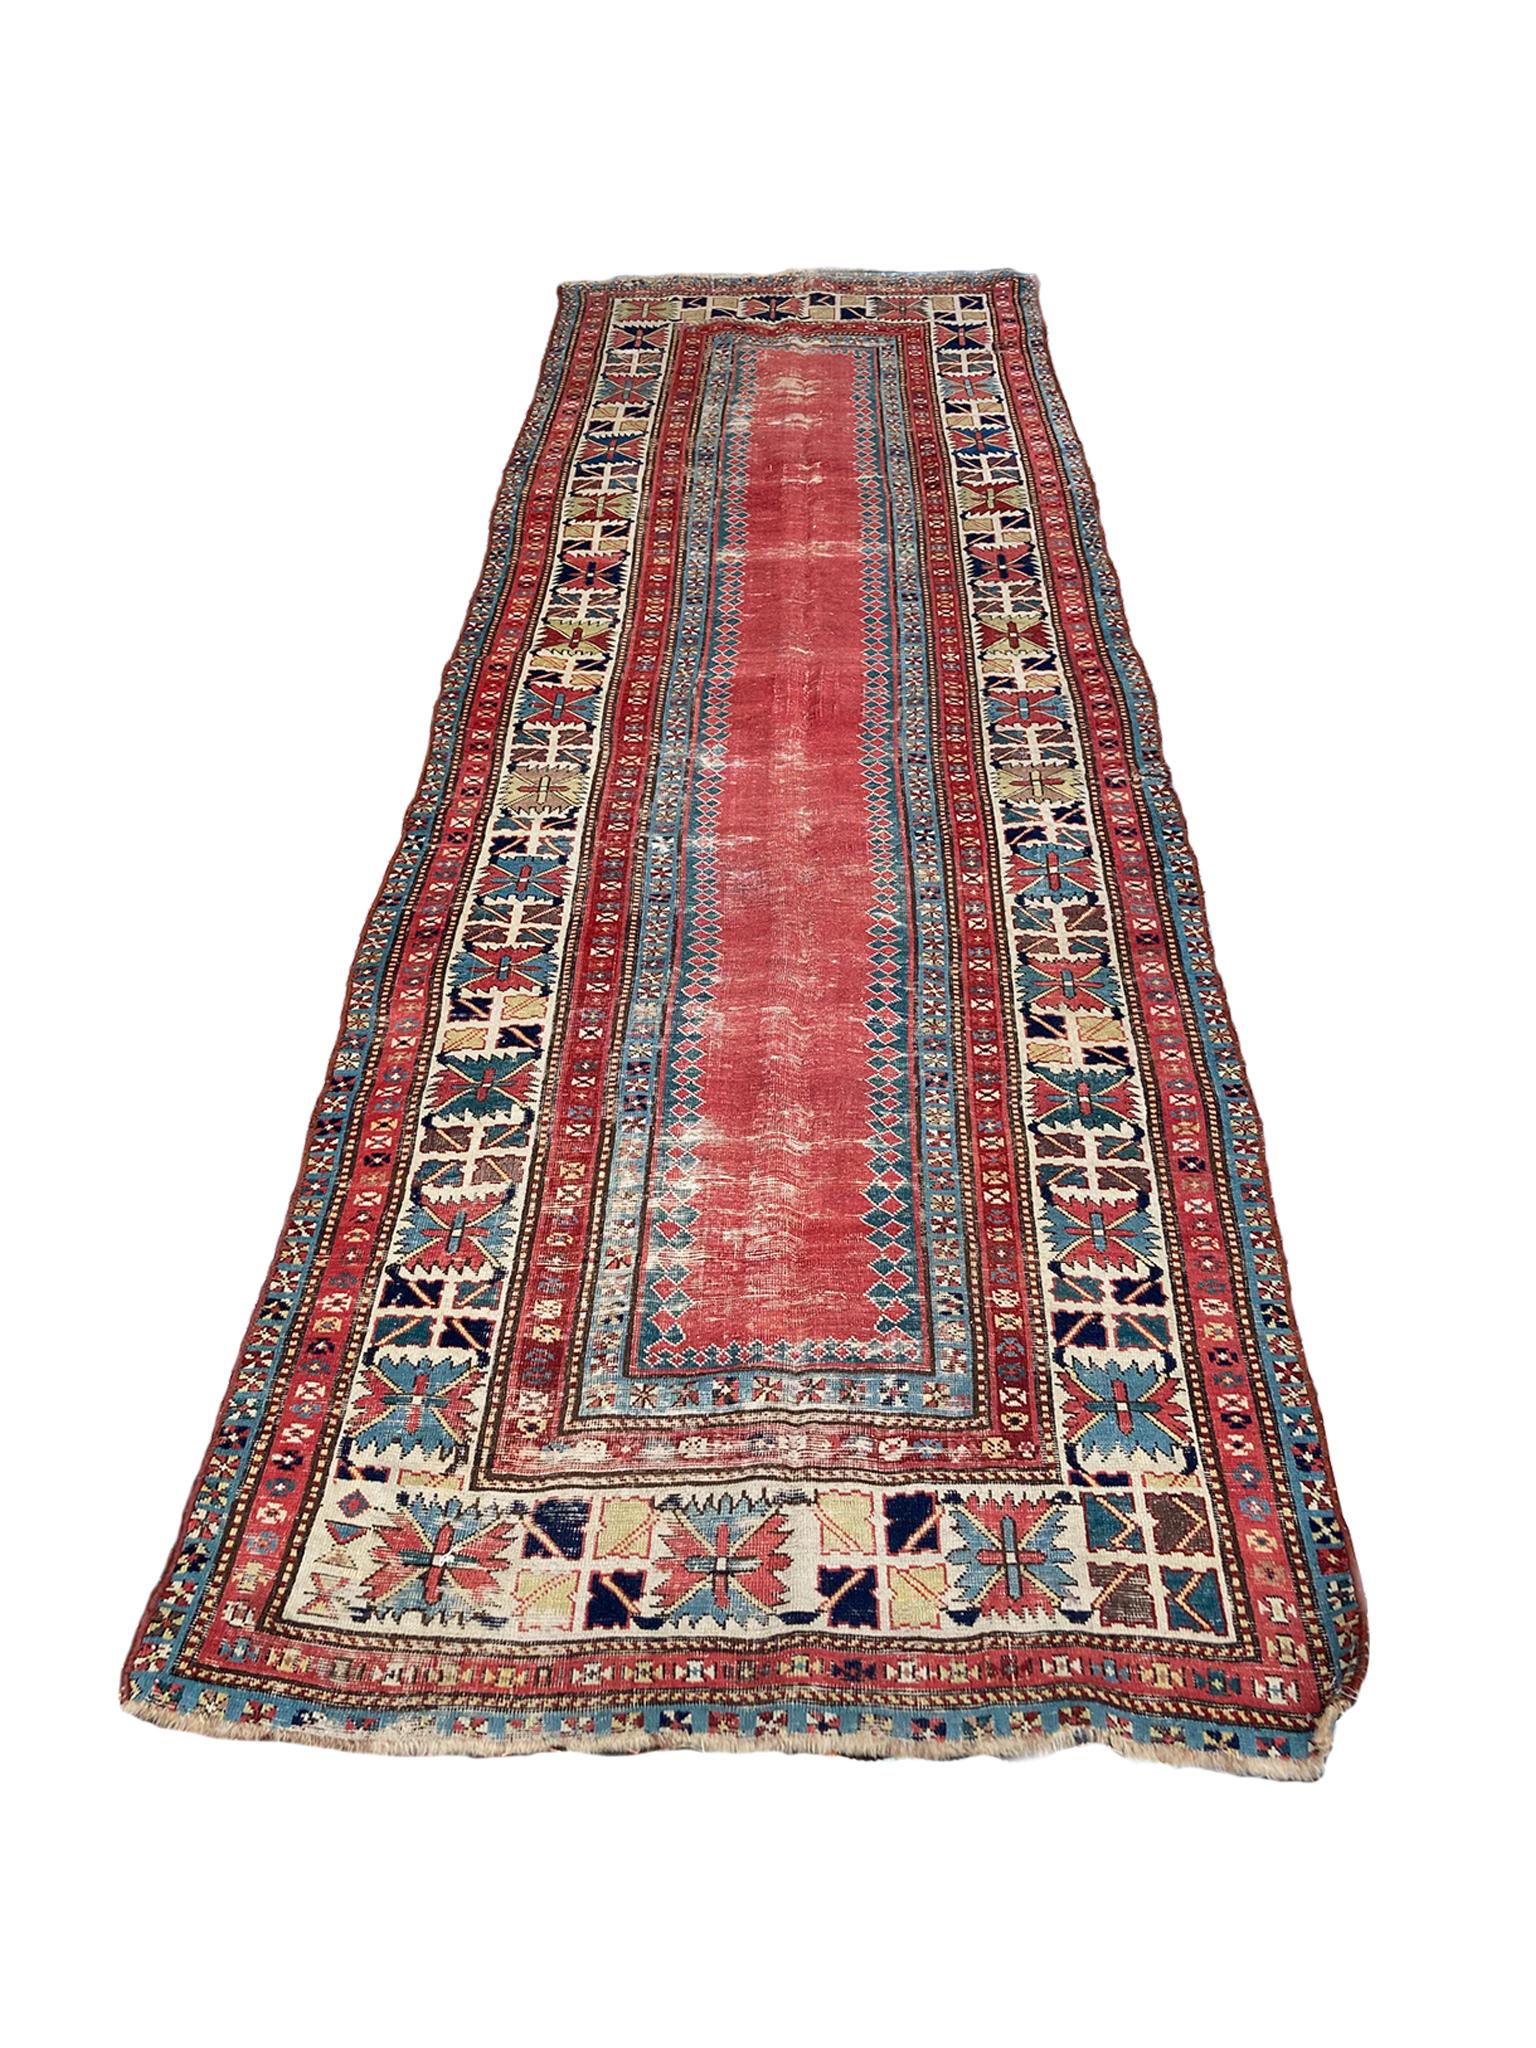 Beautifully aged Talish rug hand-knotted in the late 19th-early 20th century. The design features a central field in a bold red hue, framed by a series of borders that are richly patterned with geometric motifs. 

Dimensions:
3' 4